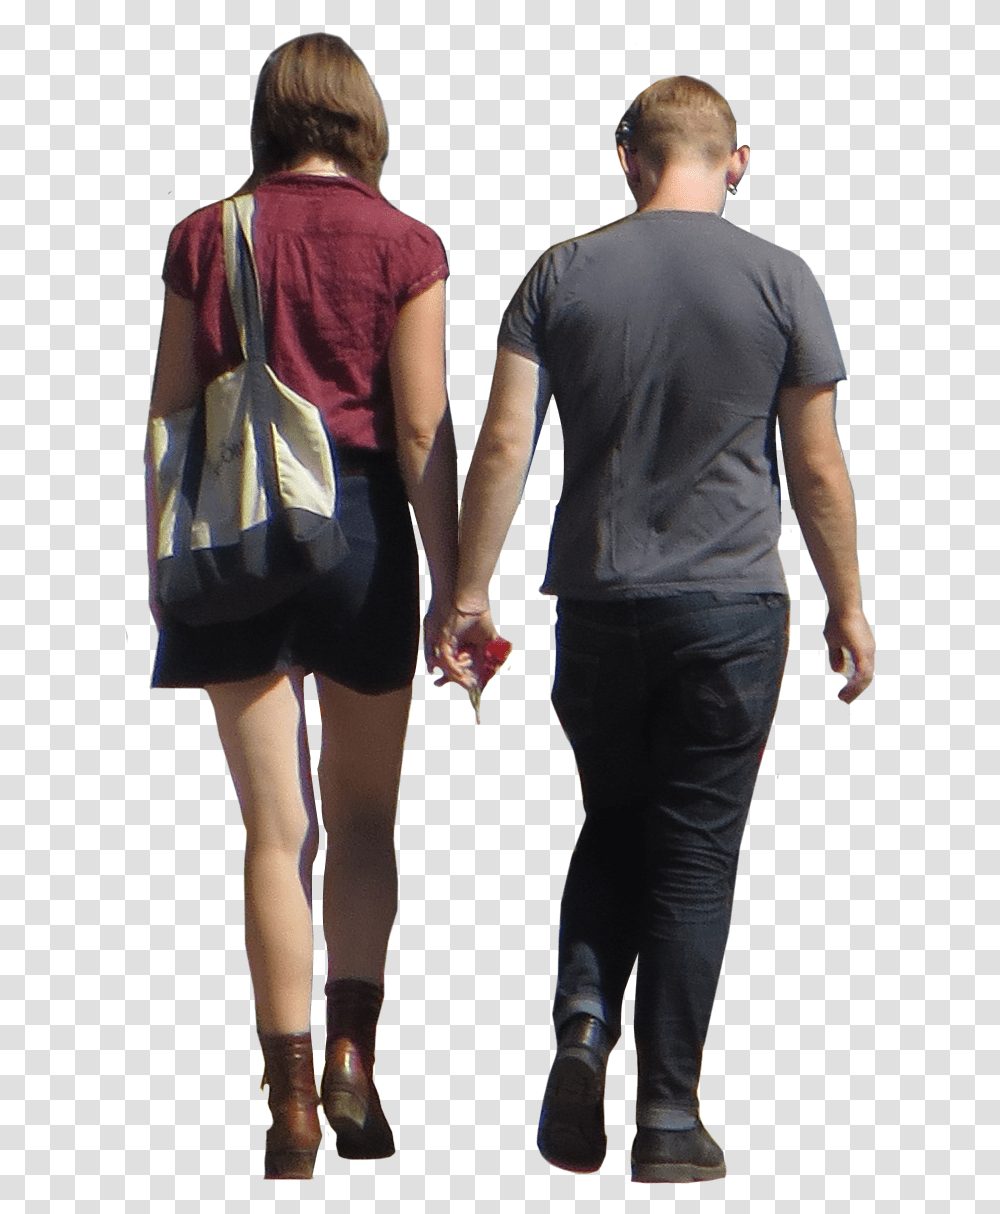 People Walking Away For Kids Girl Full Size People Walking Away, Hand, Person, Human, Holding Hands Transparent Png